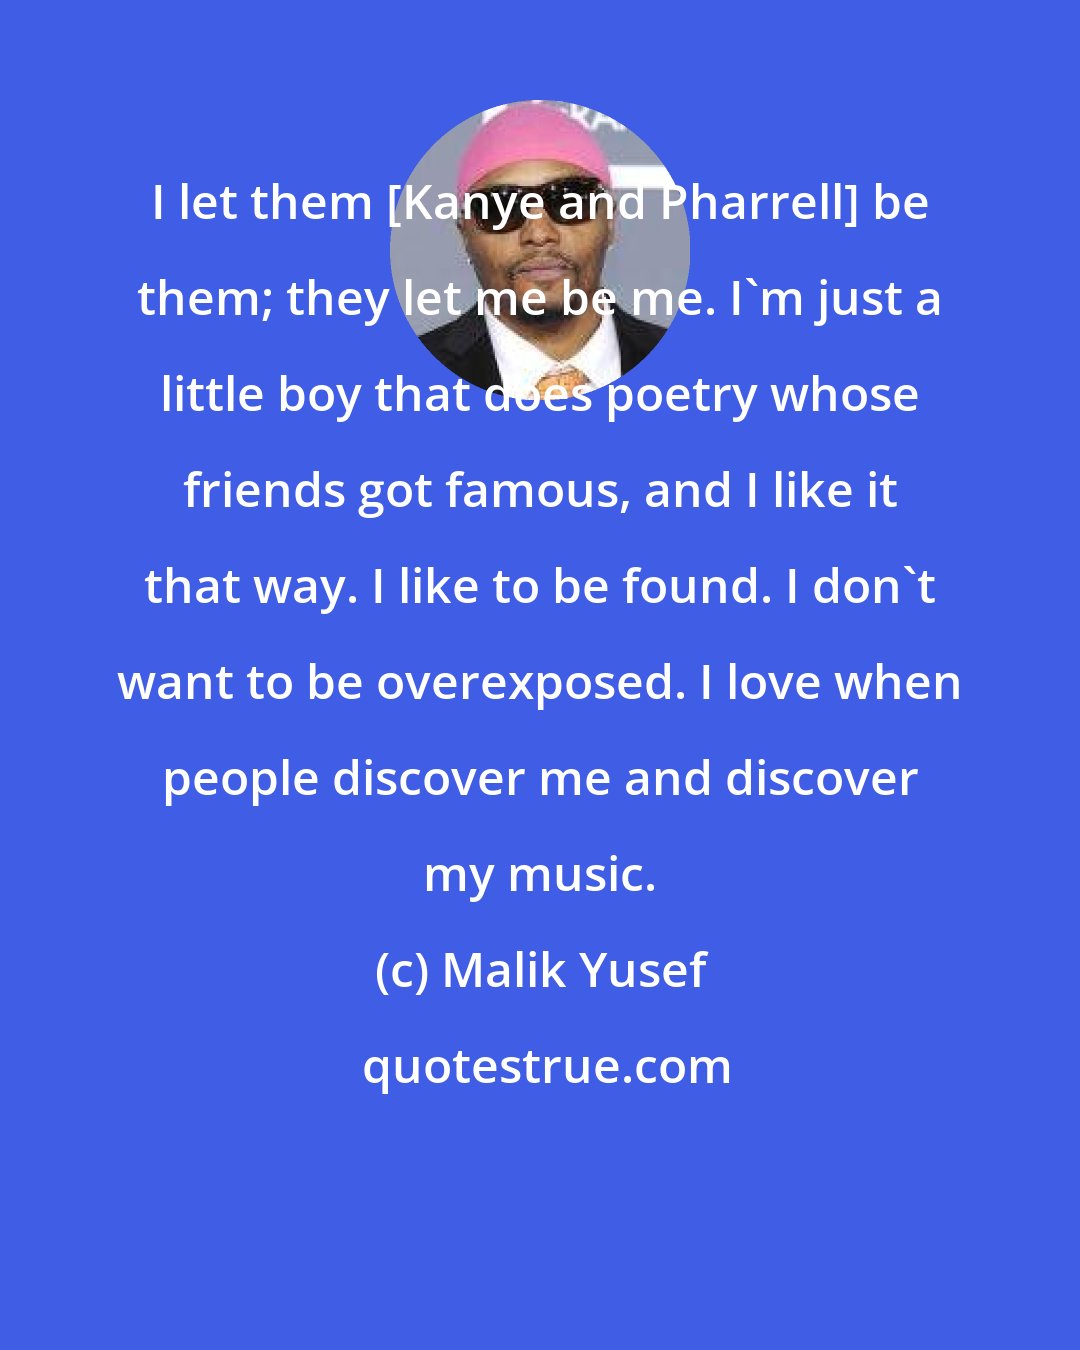 Malik Yusef: I let them [Kanye and Pharrell] be them; they let me be me. I'm just a little boy that does poetry whose friends got famous, and I like it that way. I like to be found. I don't want to be overexposed. I love when people discover me and discover my music.